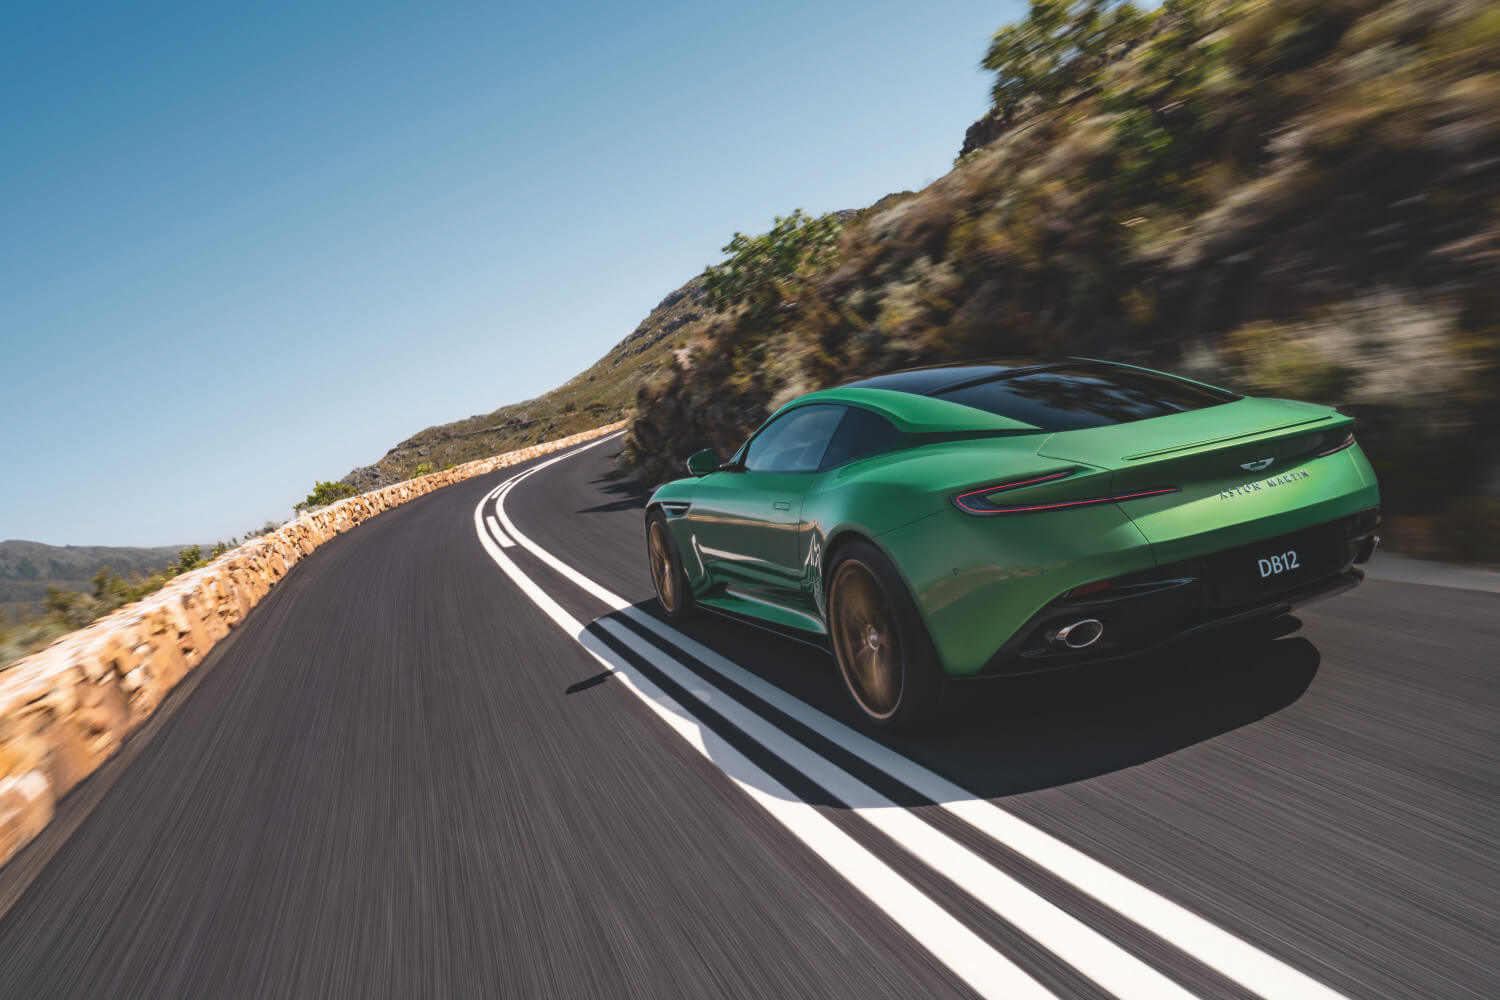 The back of a green Aston martin DB12 as it races along a mountain road.